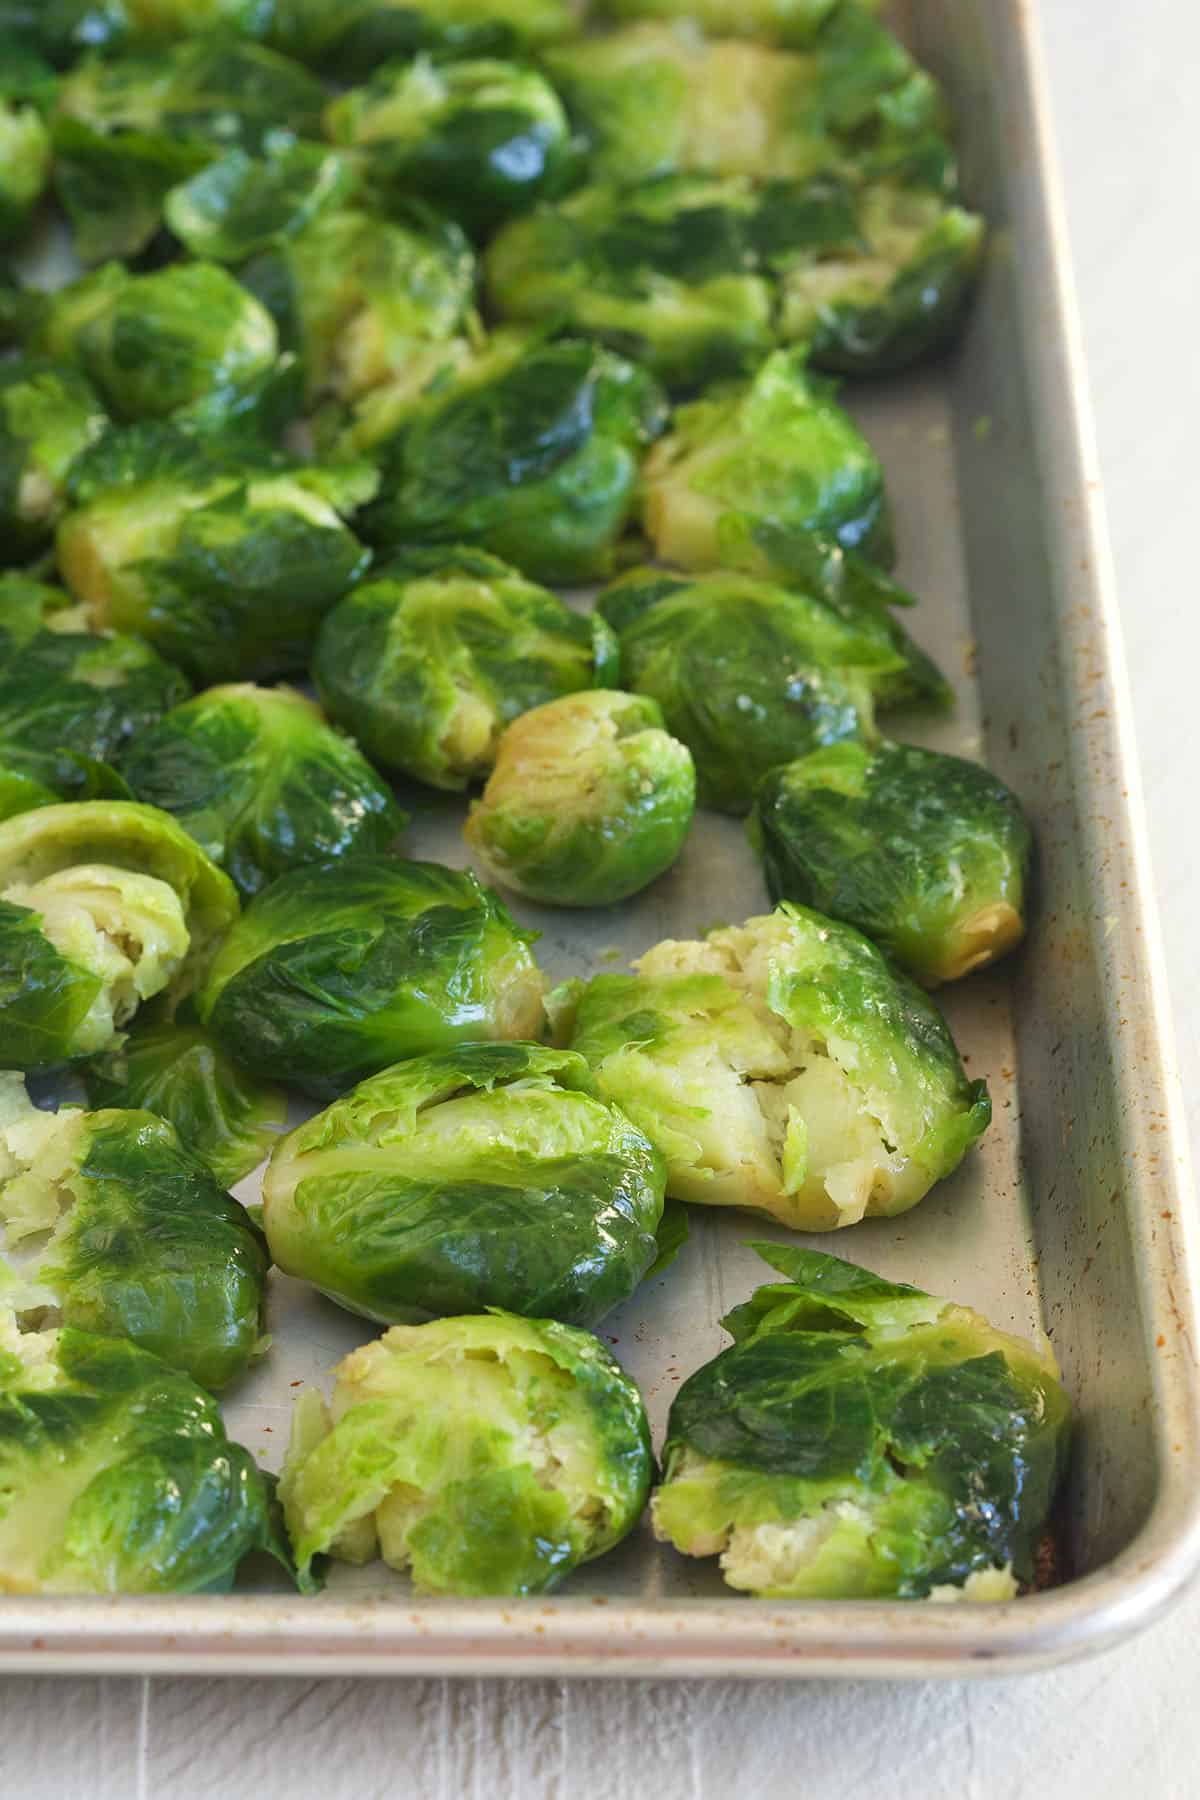 Smashed brussels sprouts are presented on a baking sheet.